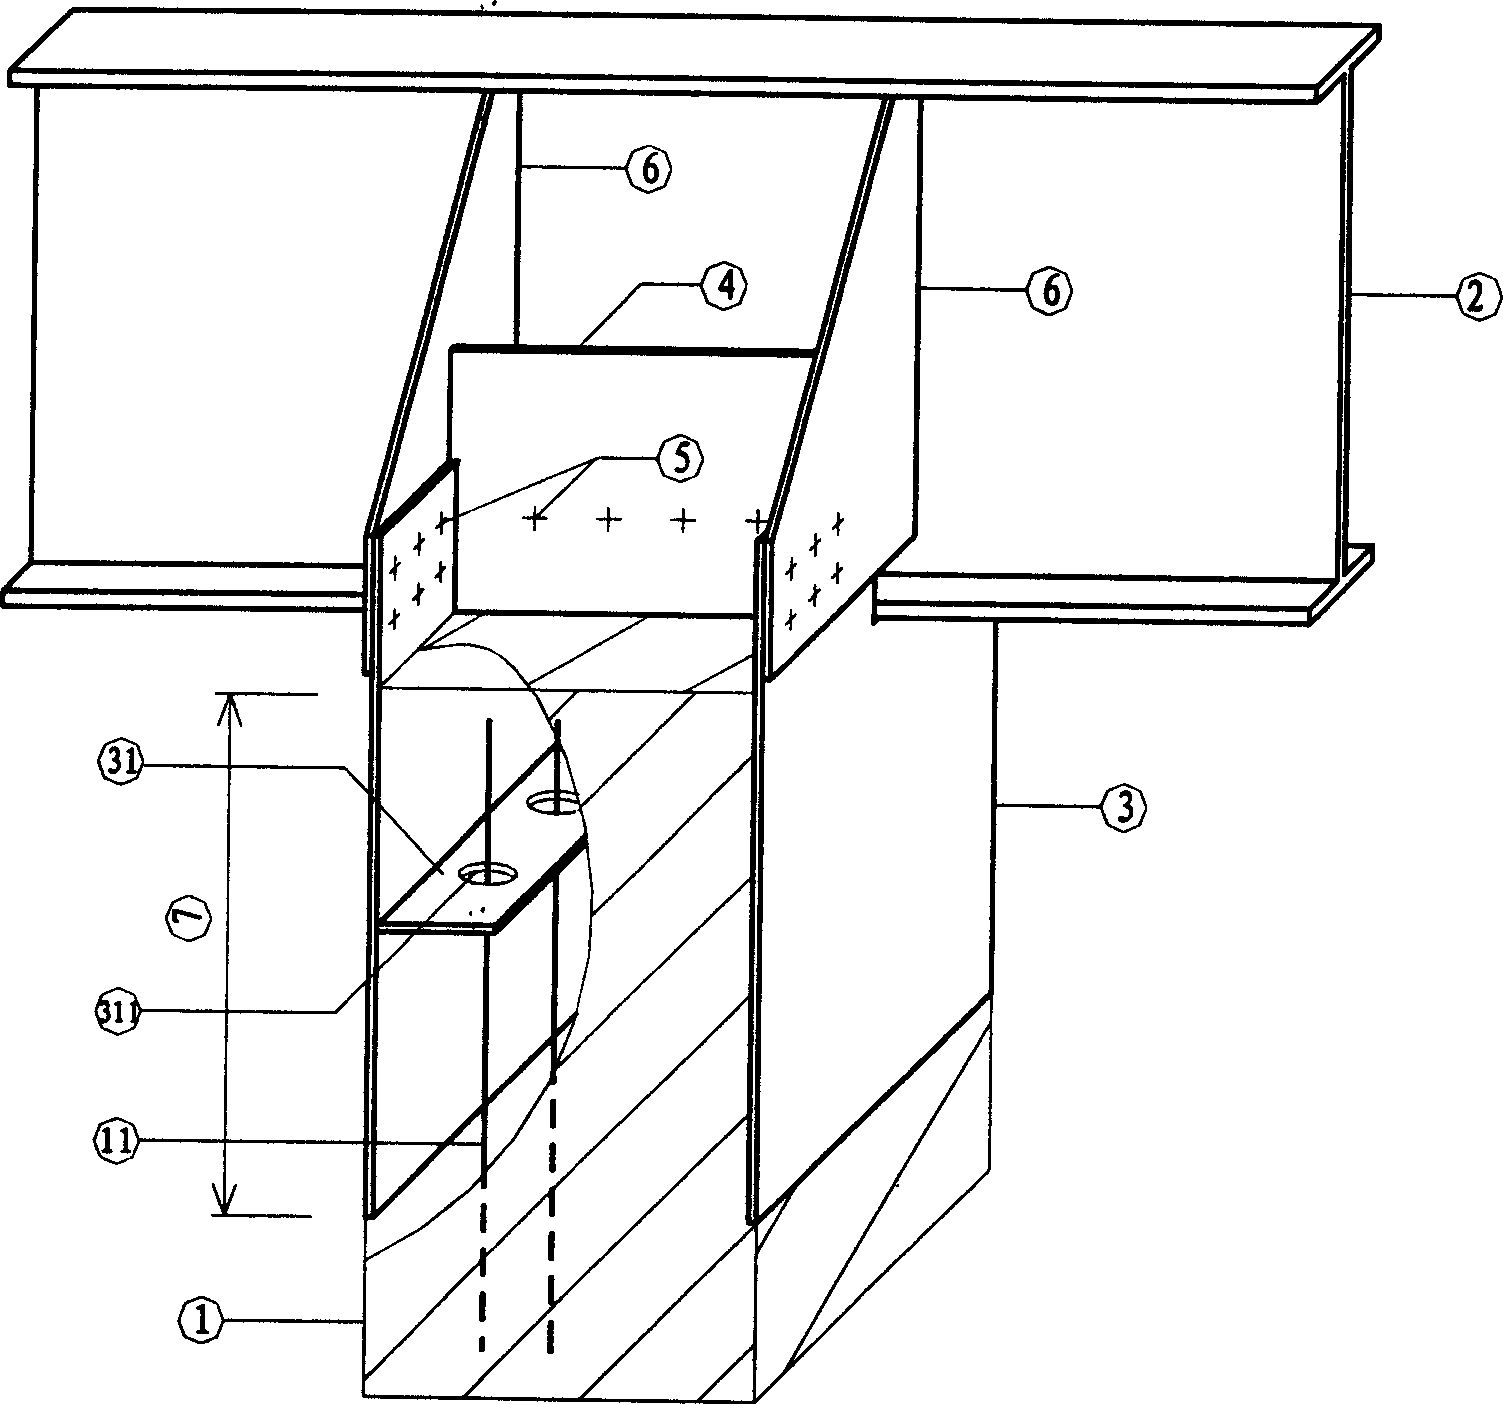 Connecting method for rigid joint of steel girdle and concrete bridge pier